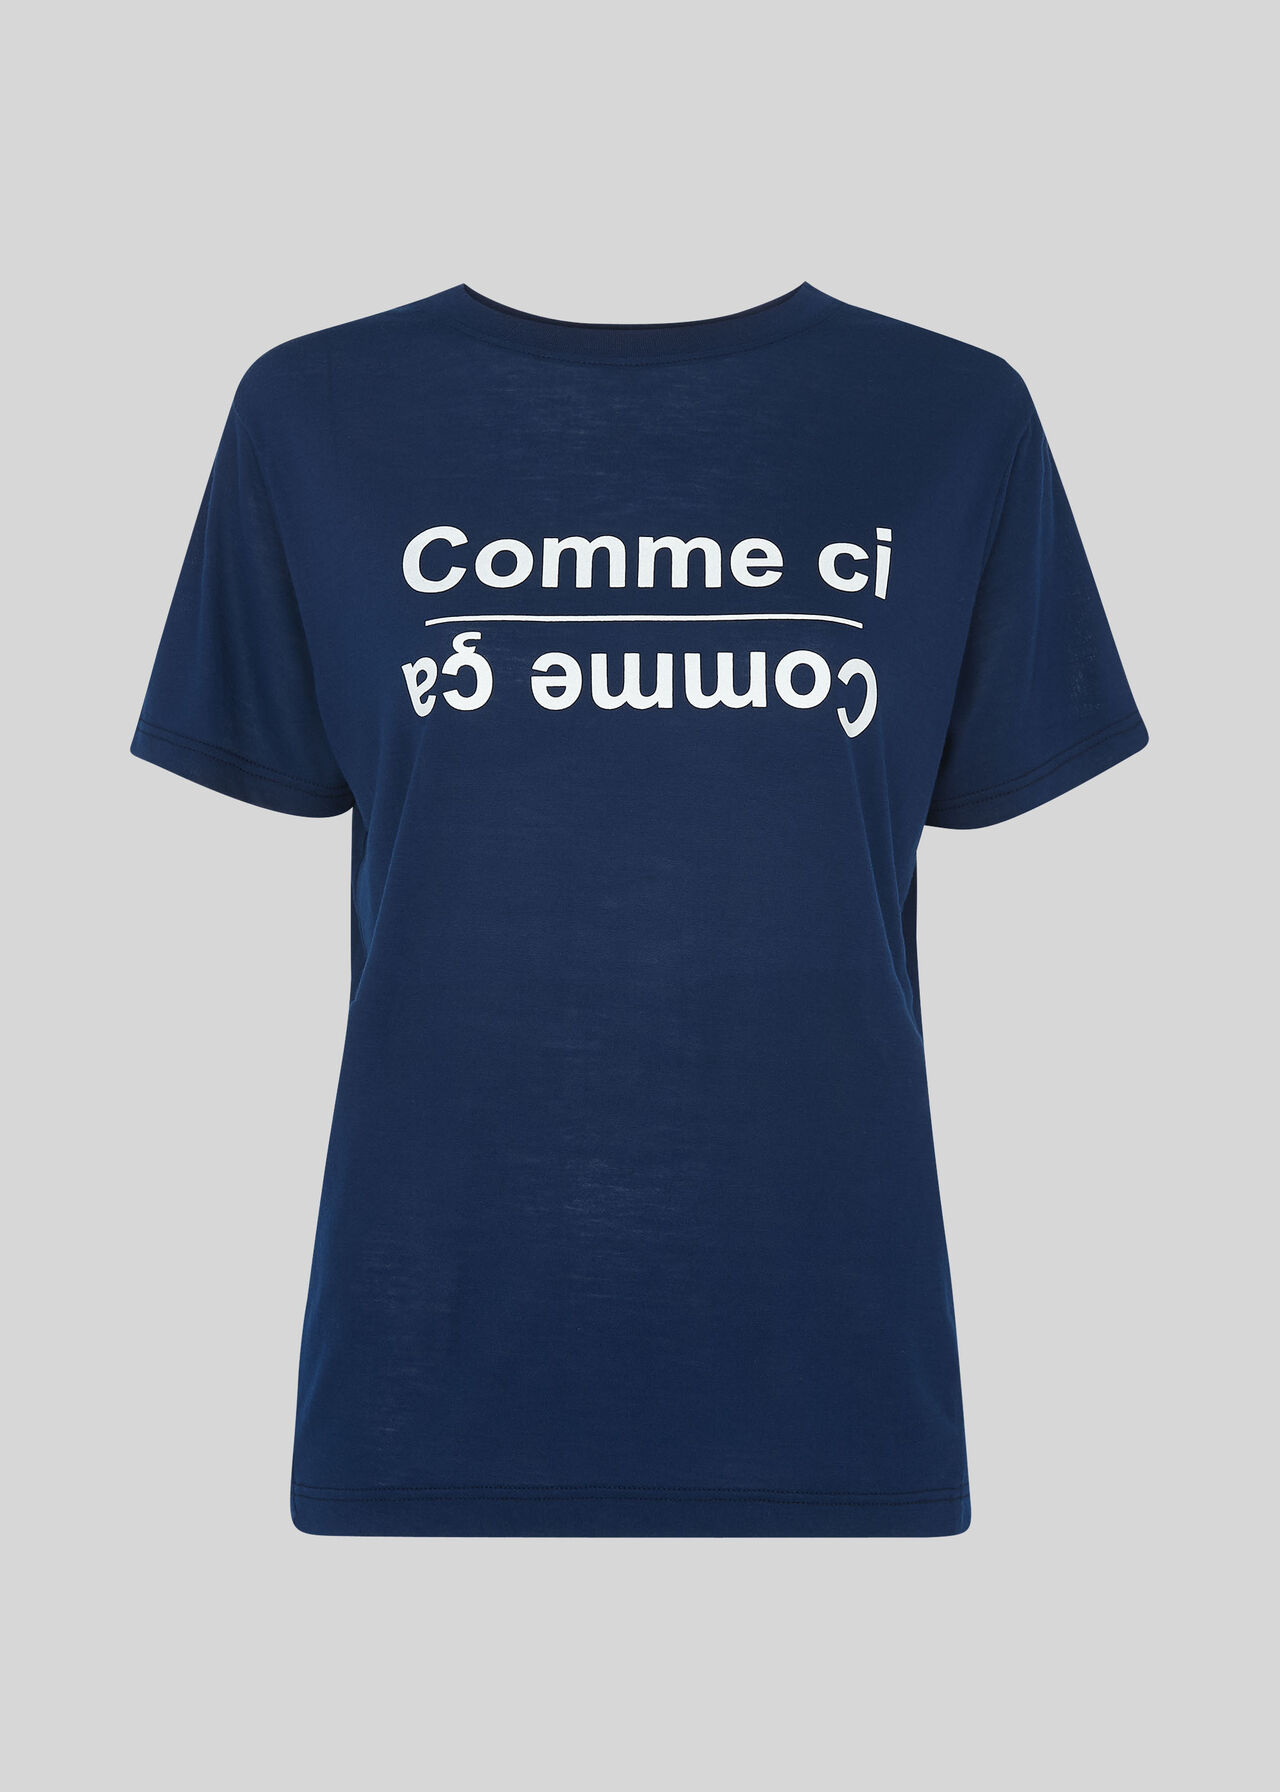 Comme Ci Comme Ca Logo Tshirt Navy